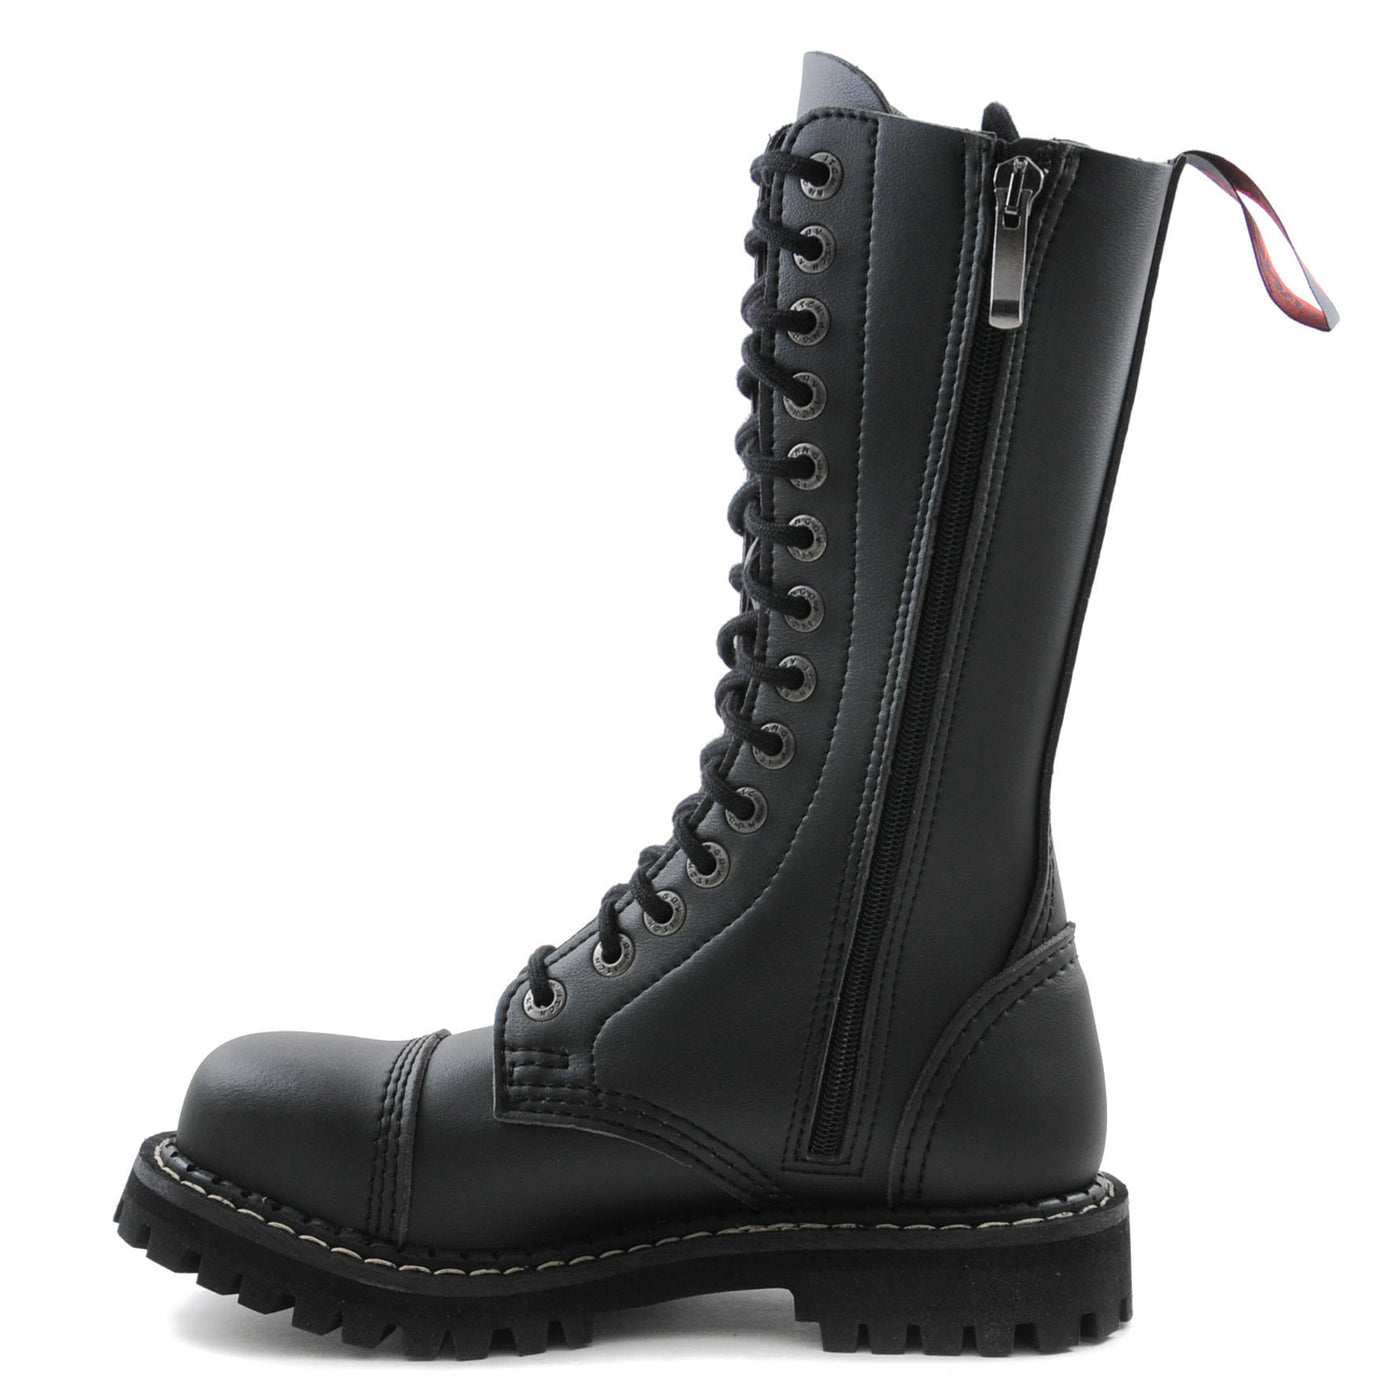 Angry Itch 14 Hole Combat Ranger Boots with Steel Toe Cap Black Vegan Leather